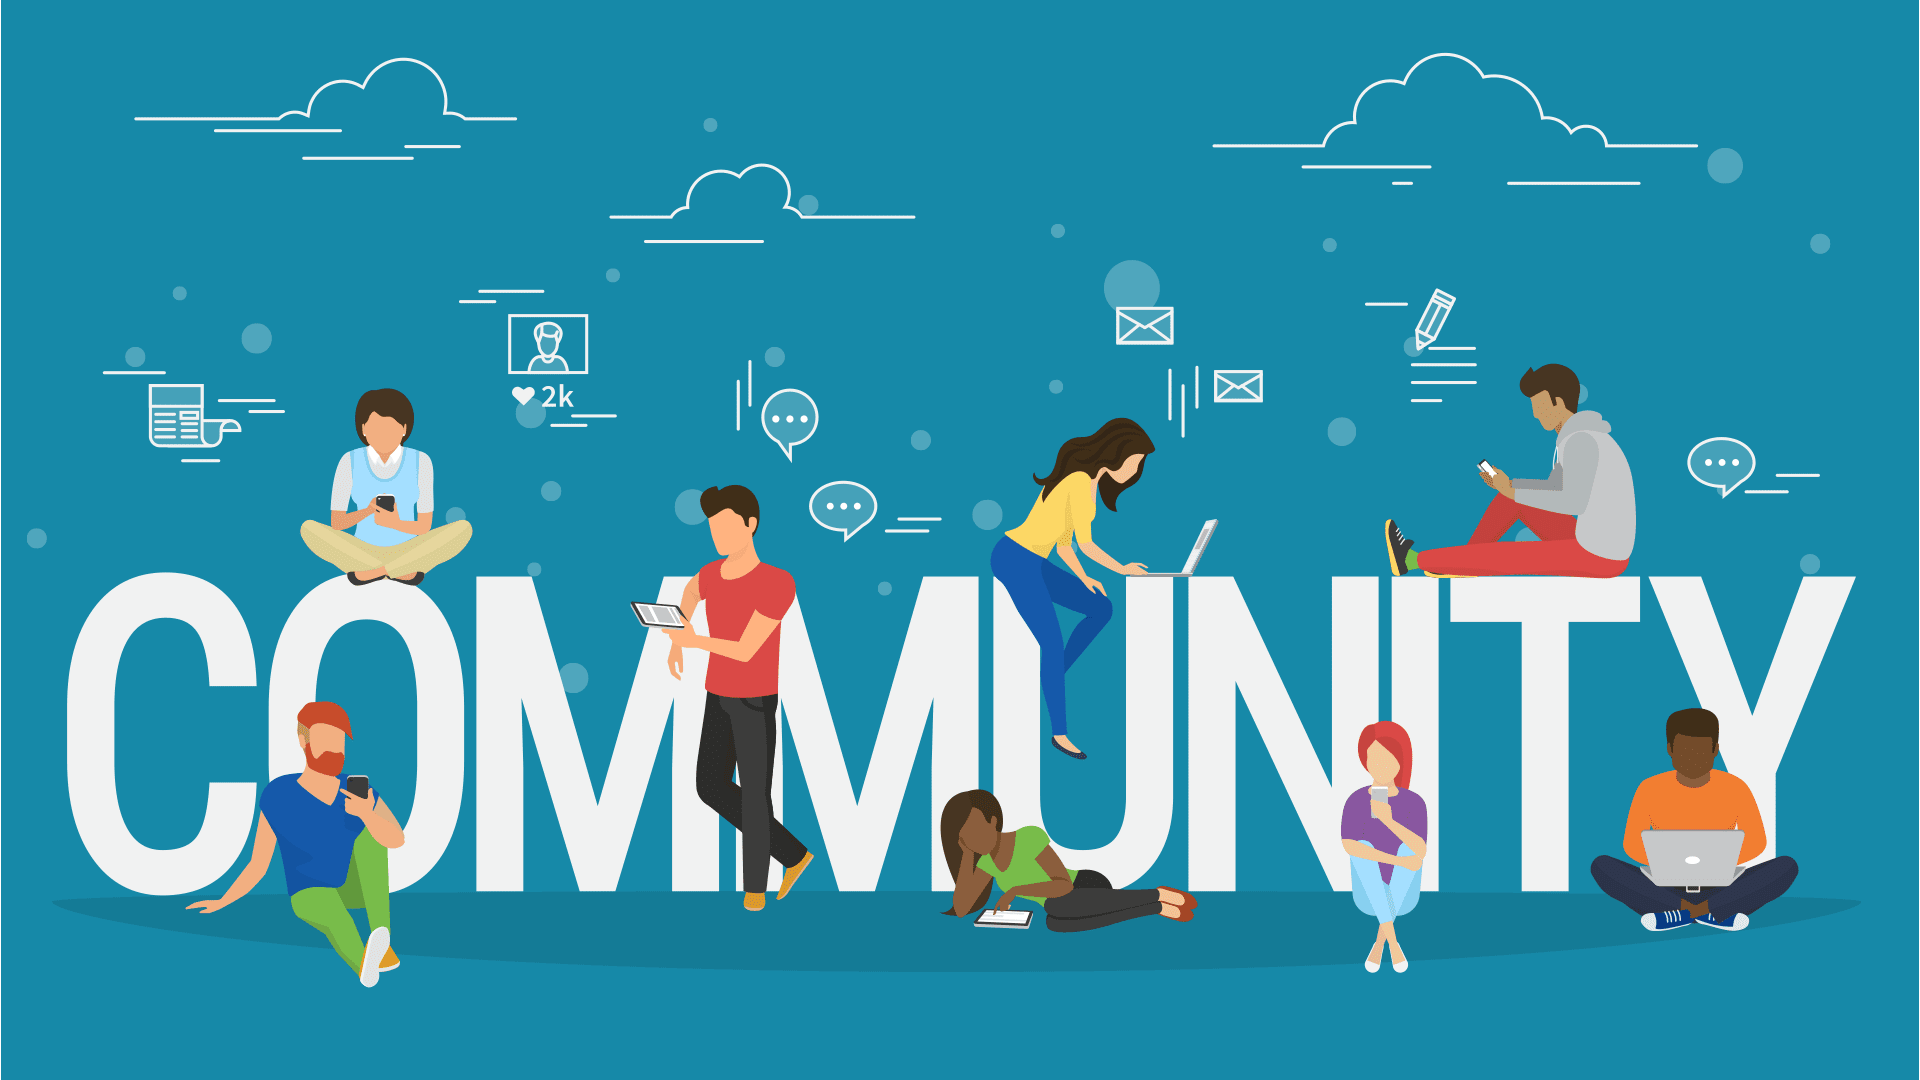 A picture with the word "Community" in white letters with people on different modes of communication sitting around or on the letters.